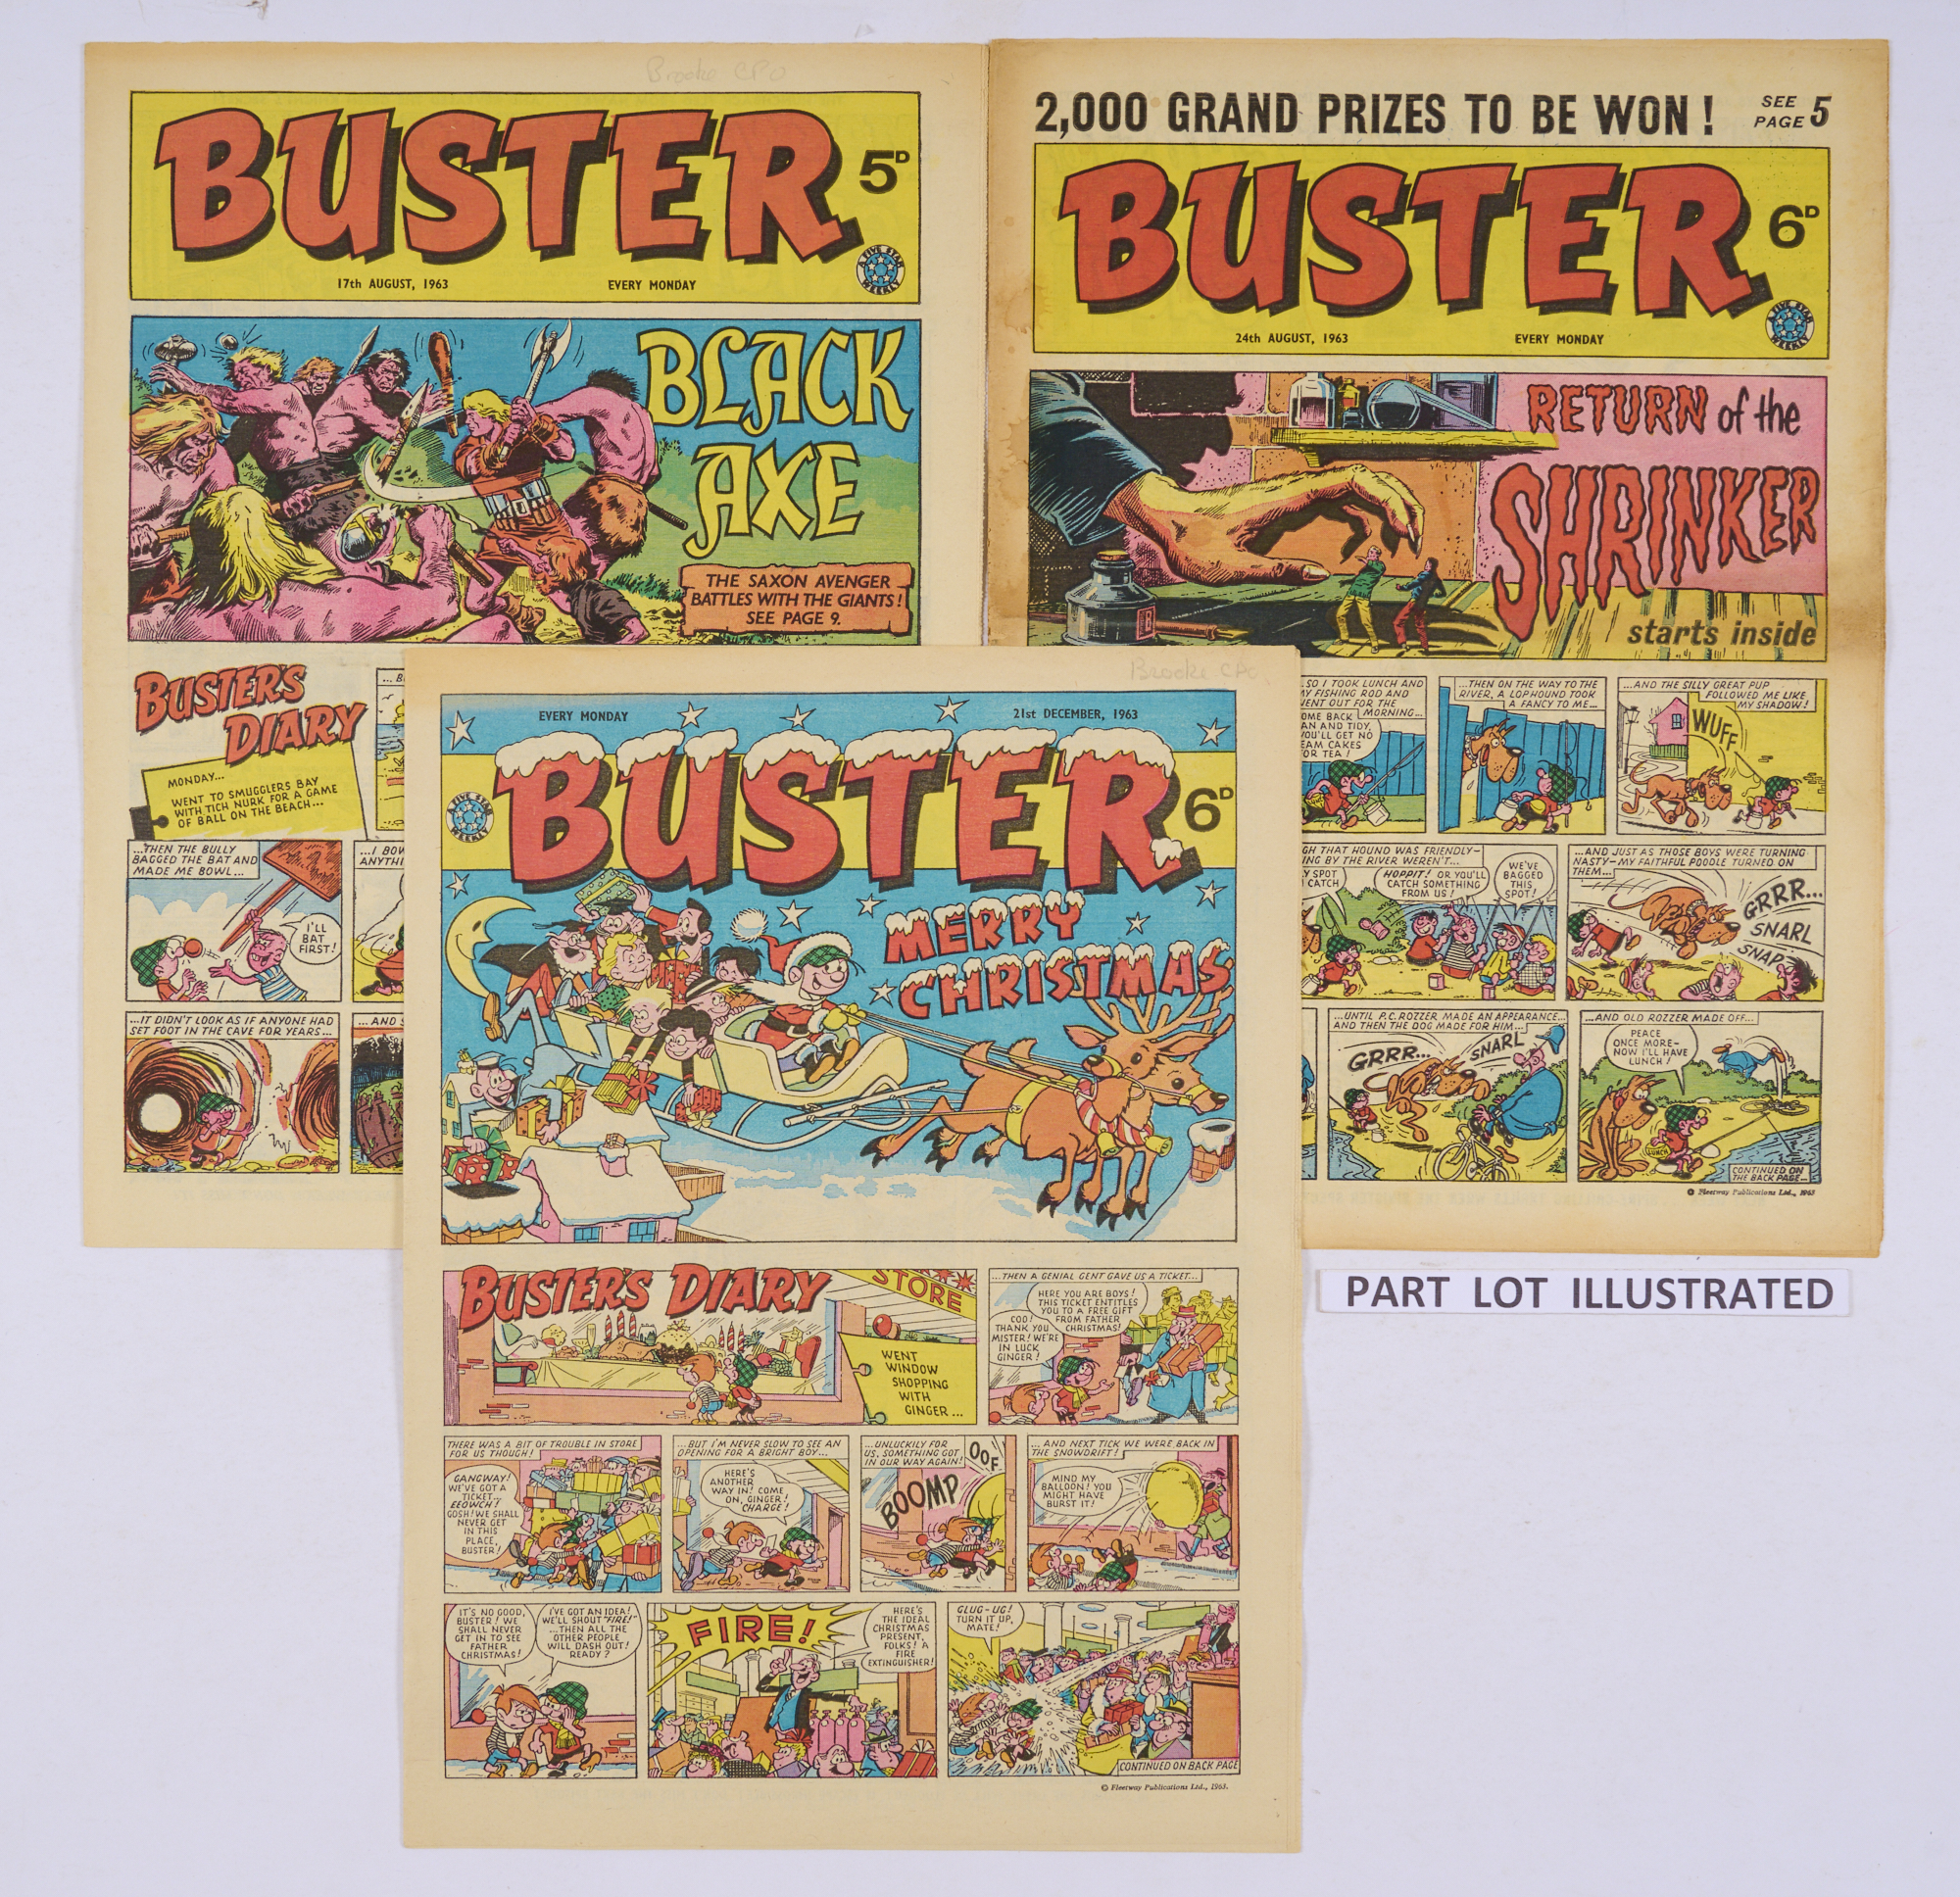 Buster (5 Jan - 28 Dec 1963). Complete year. Starring Maxwell Hawke, The Black Axe, Bruce Forsyth, - Image 2 of 2